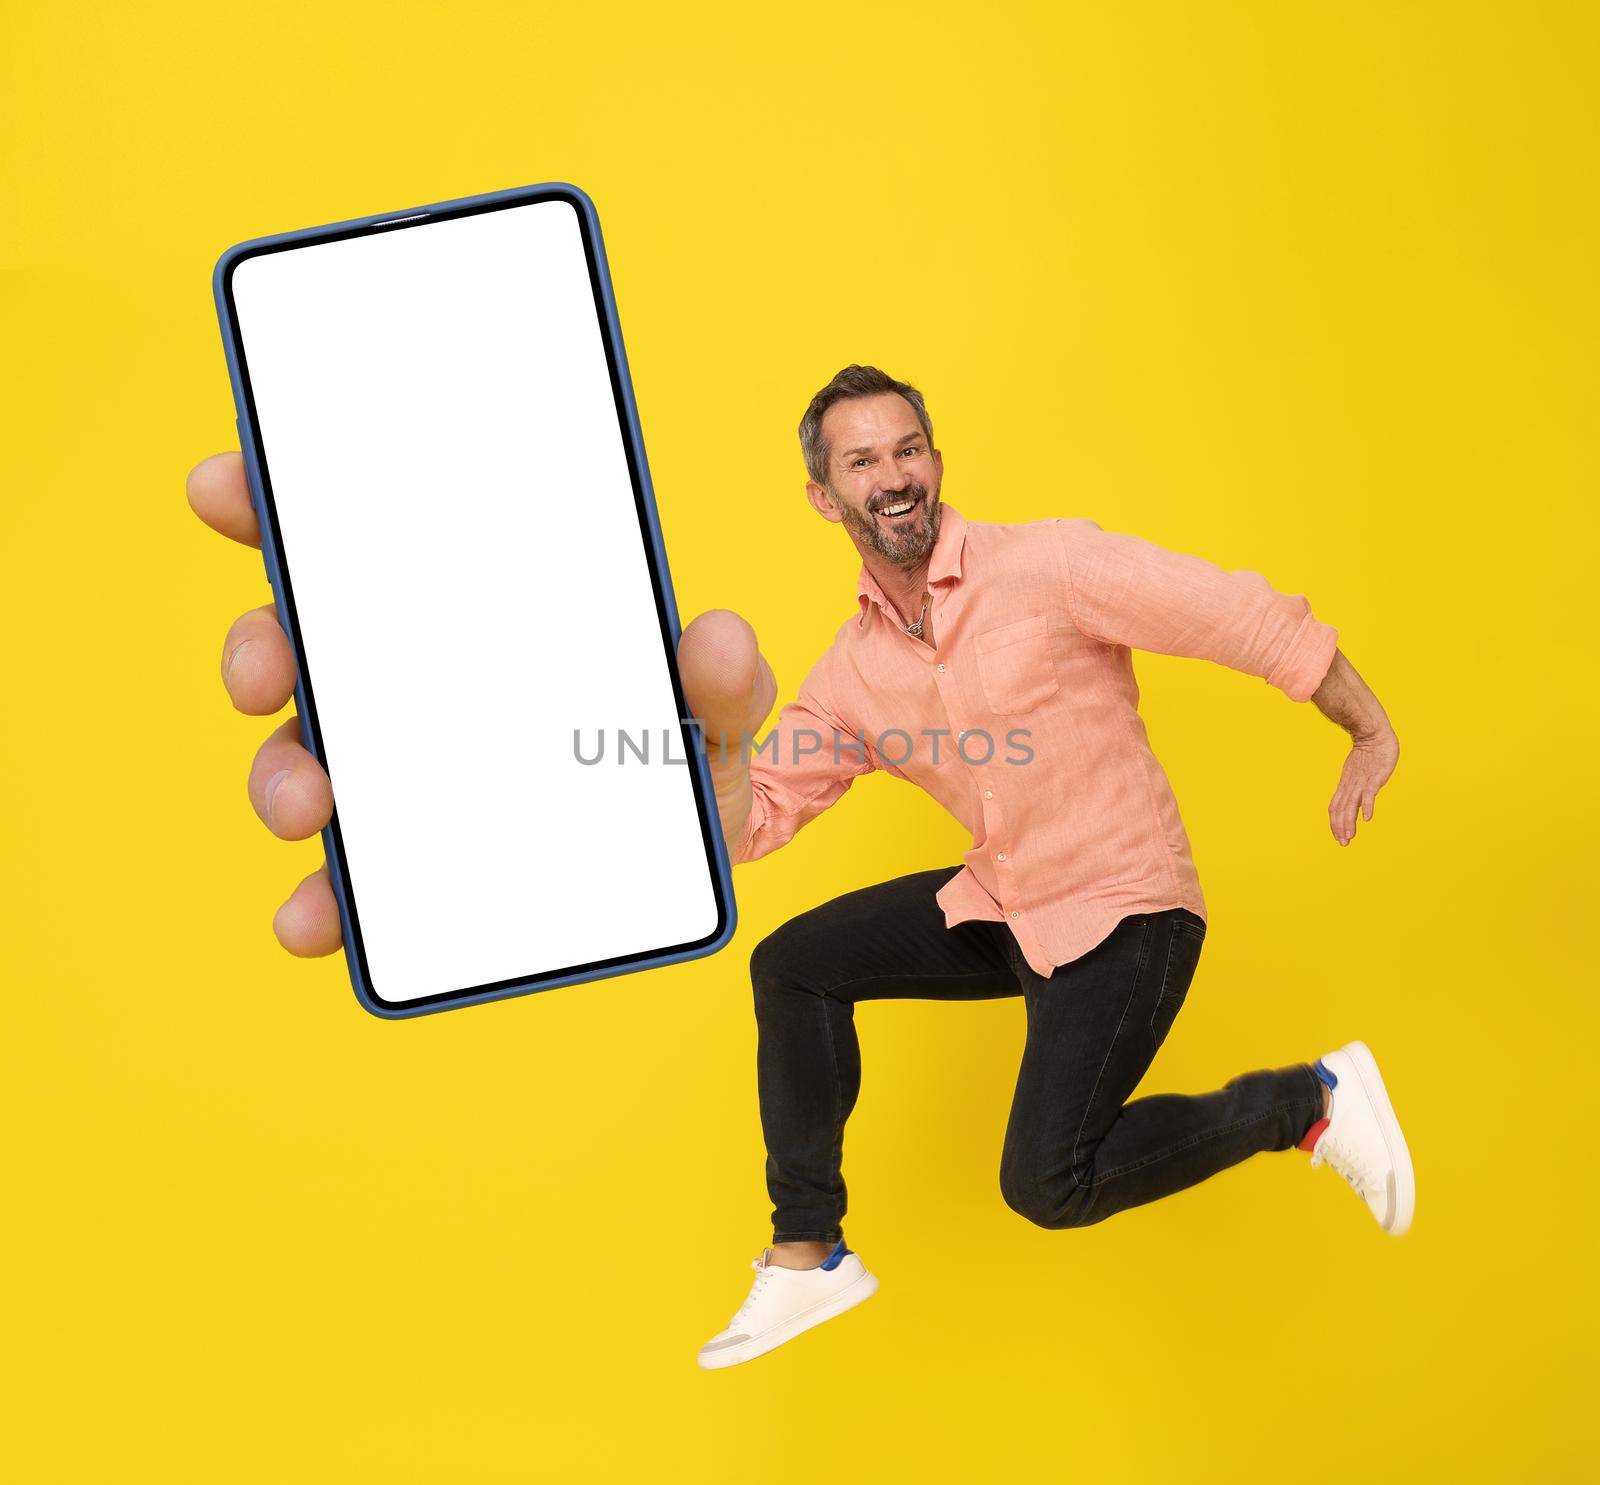 Mature grey haired man in high jump with smartphone in hand happy smiling on camera wearing peach shirt and black jeans isolated on yellow background. Mature fit man with smartphone by LipikStockMedia